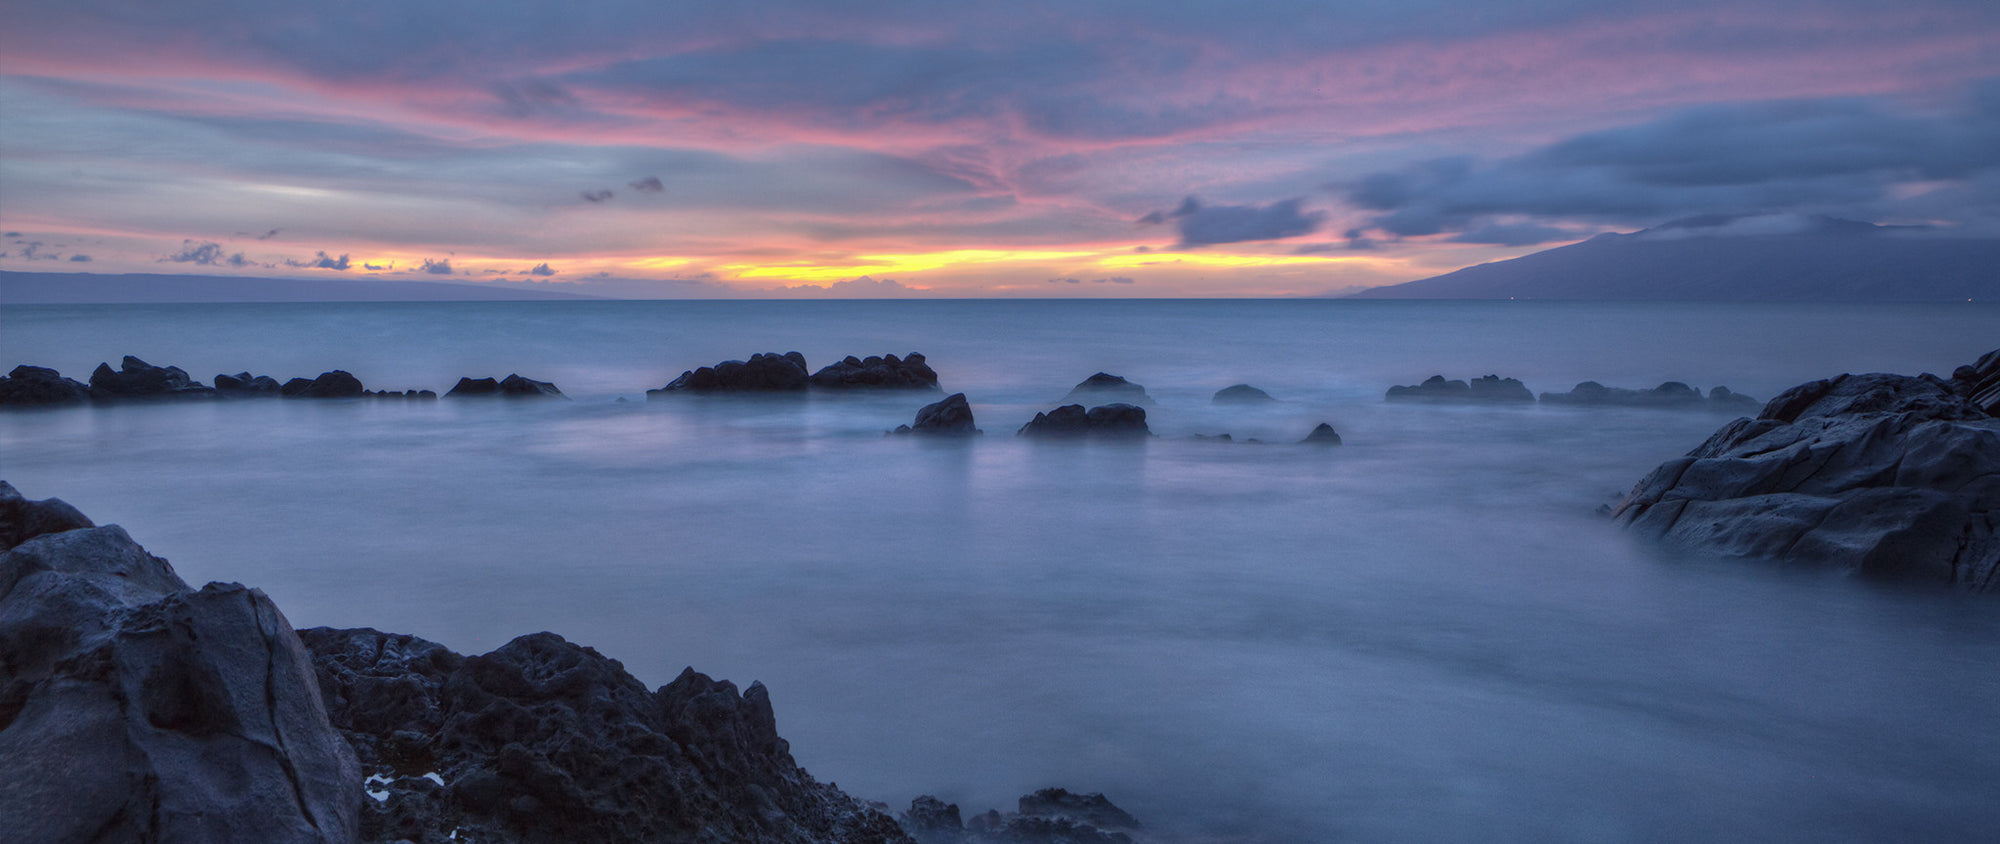 A dark and beautiful sunset shot taken on Maui. The slow shutter speed enables the ocean in the forground to look almost like smoke.